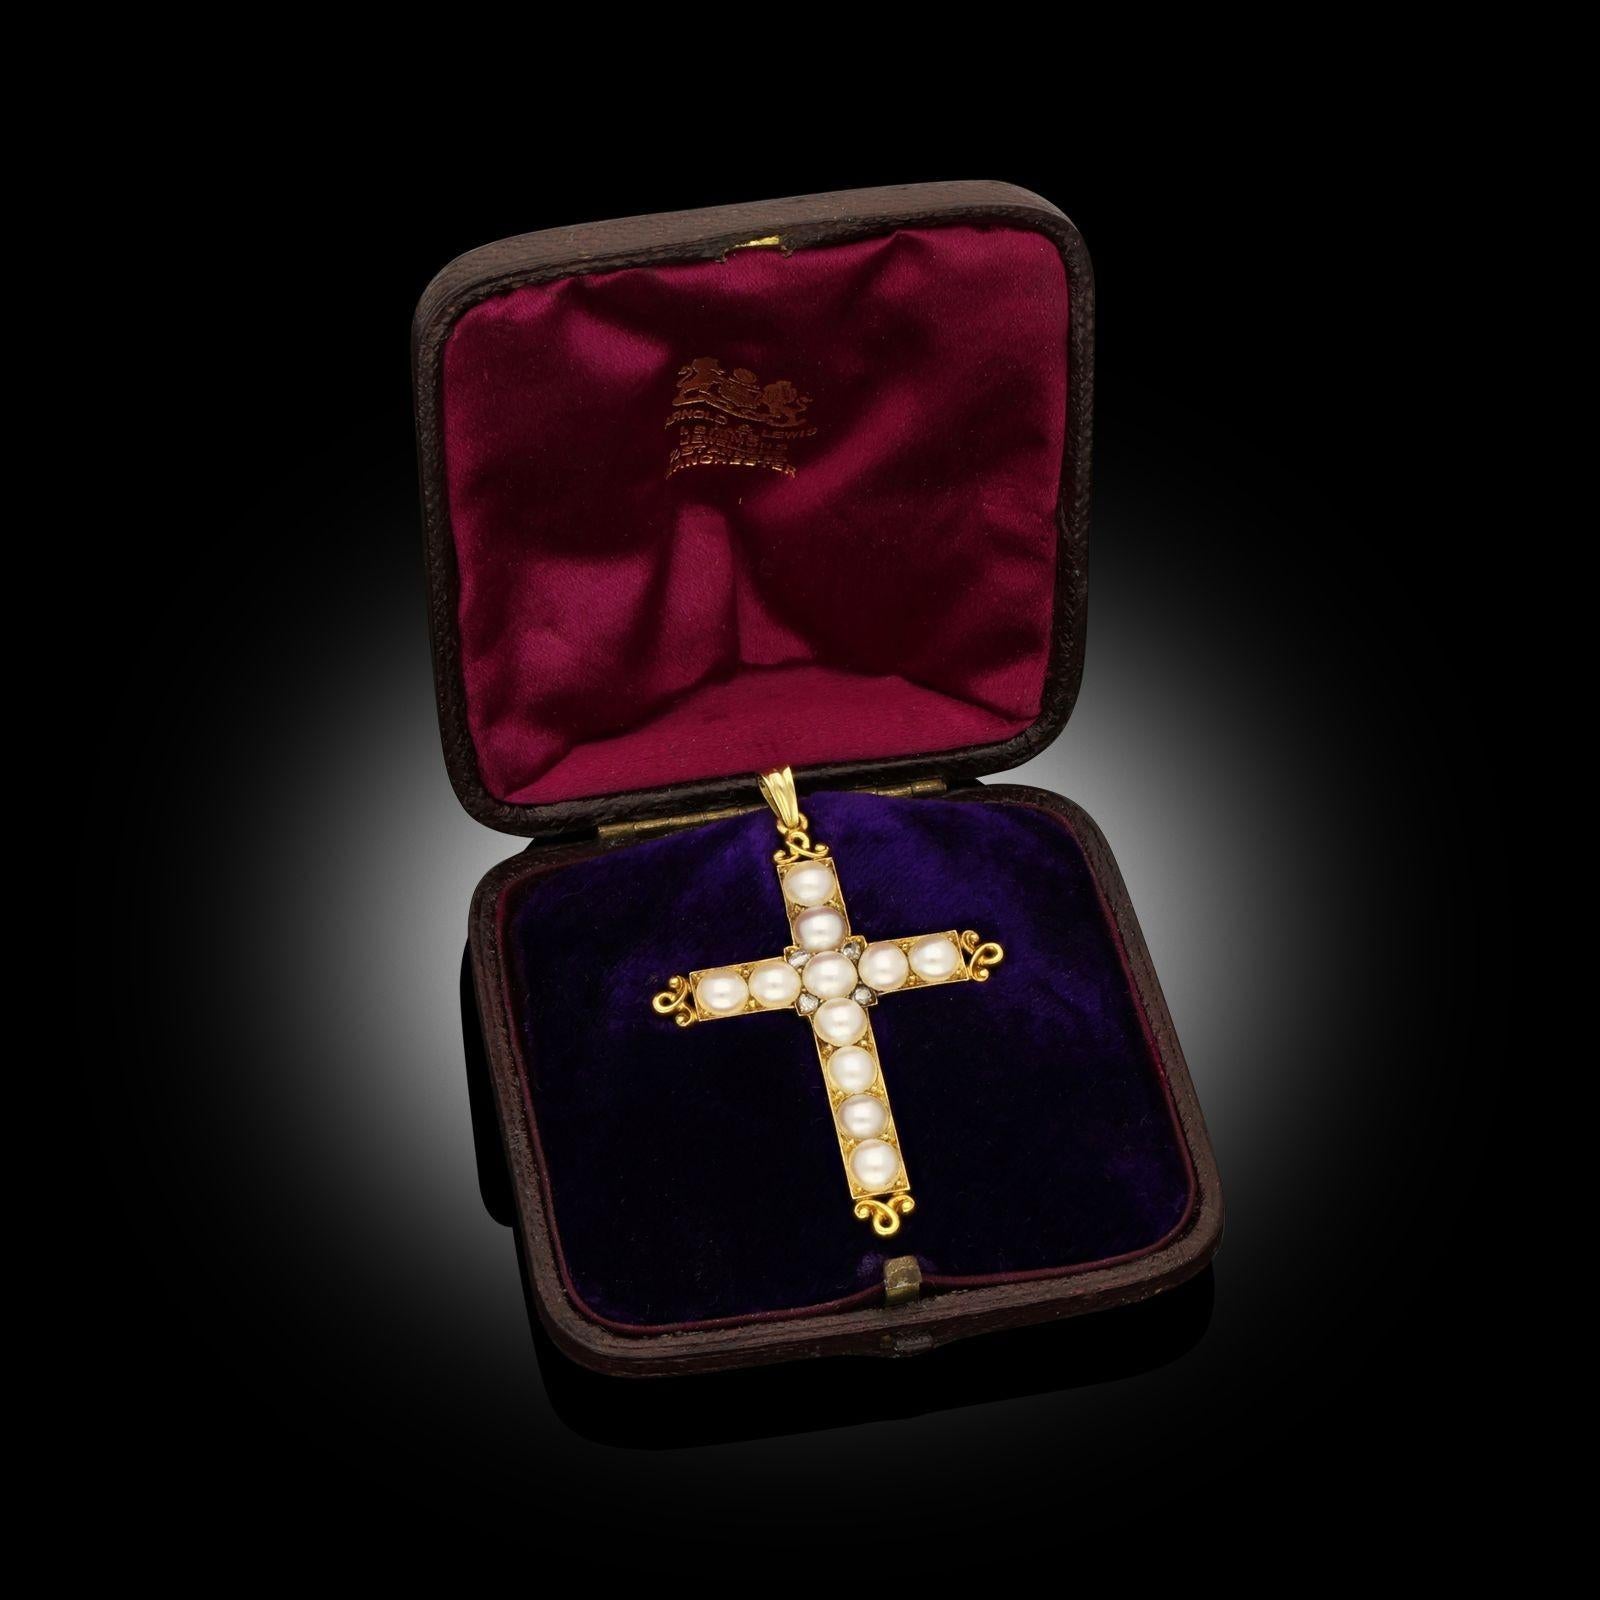 A Victorian pearl and diamond cross pendant circa 1890. This Latin style cross is set with natural saltwater half pearls with four small old cut diamonds embellishing the centre. The cross terminations each have an ornate scroll design all set in